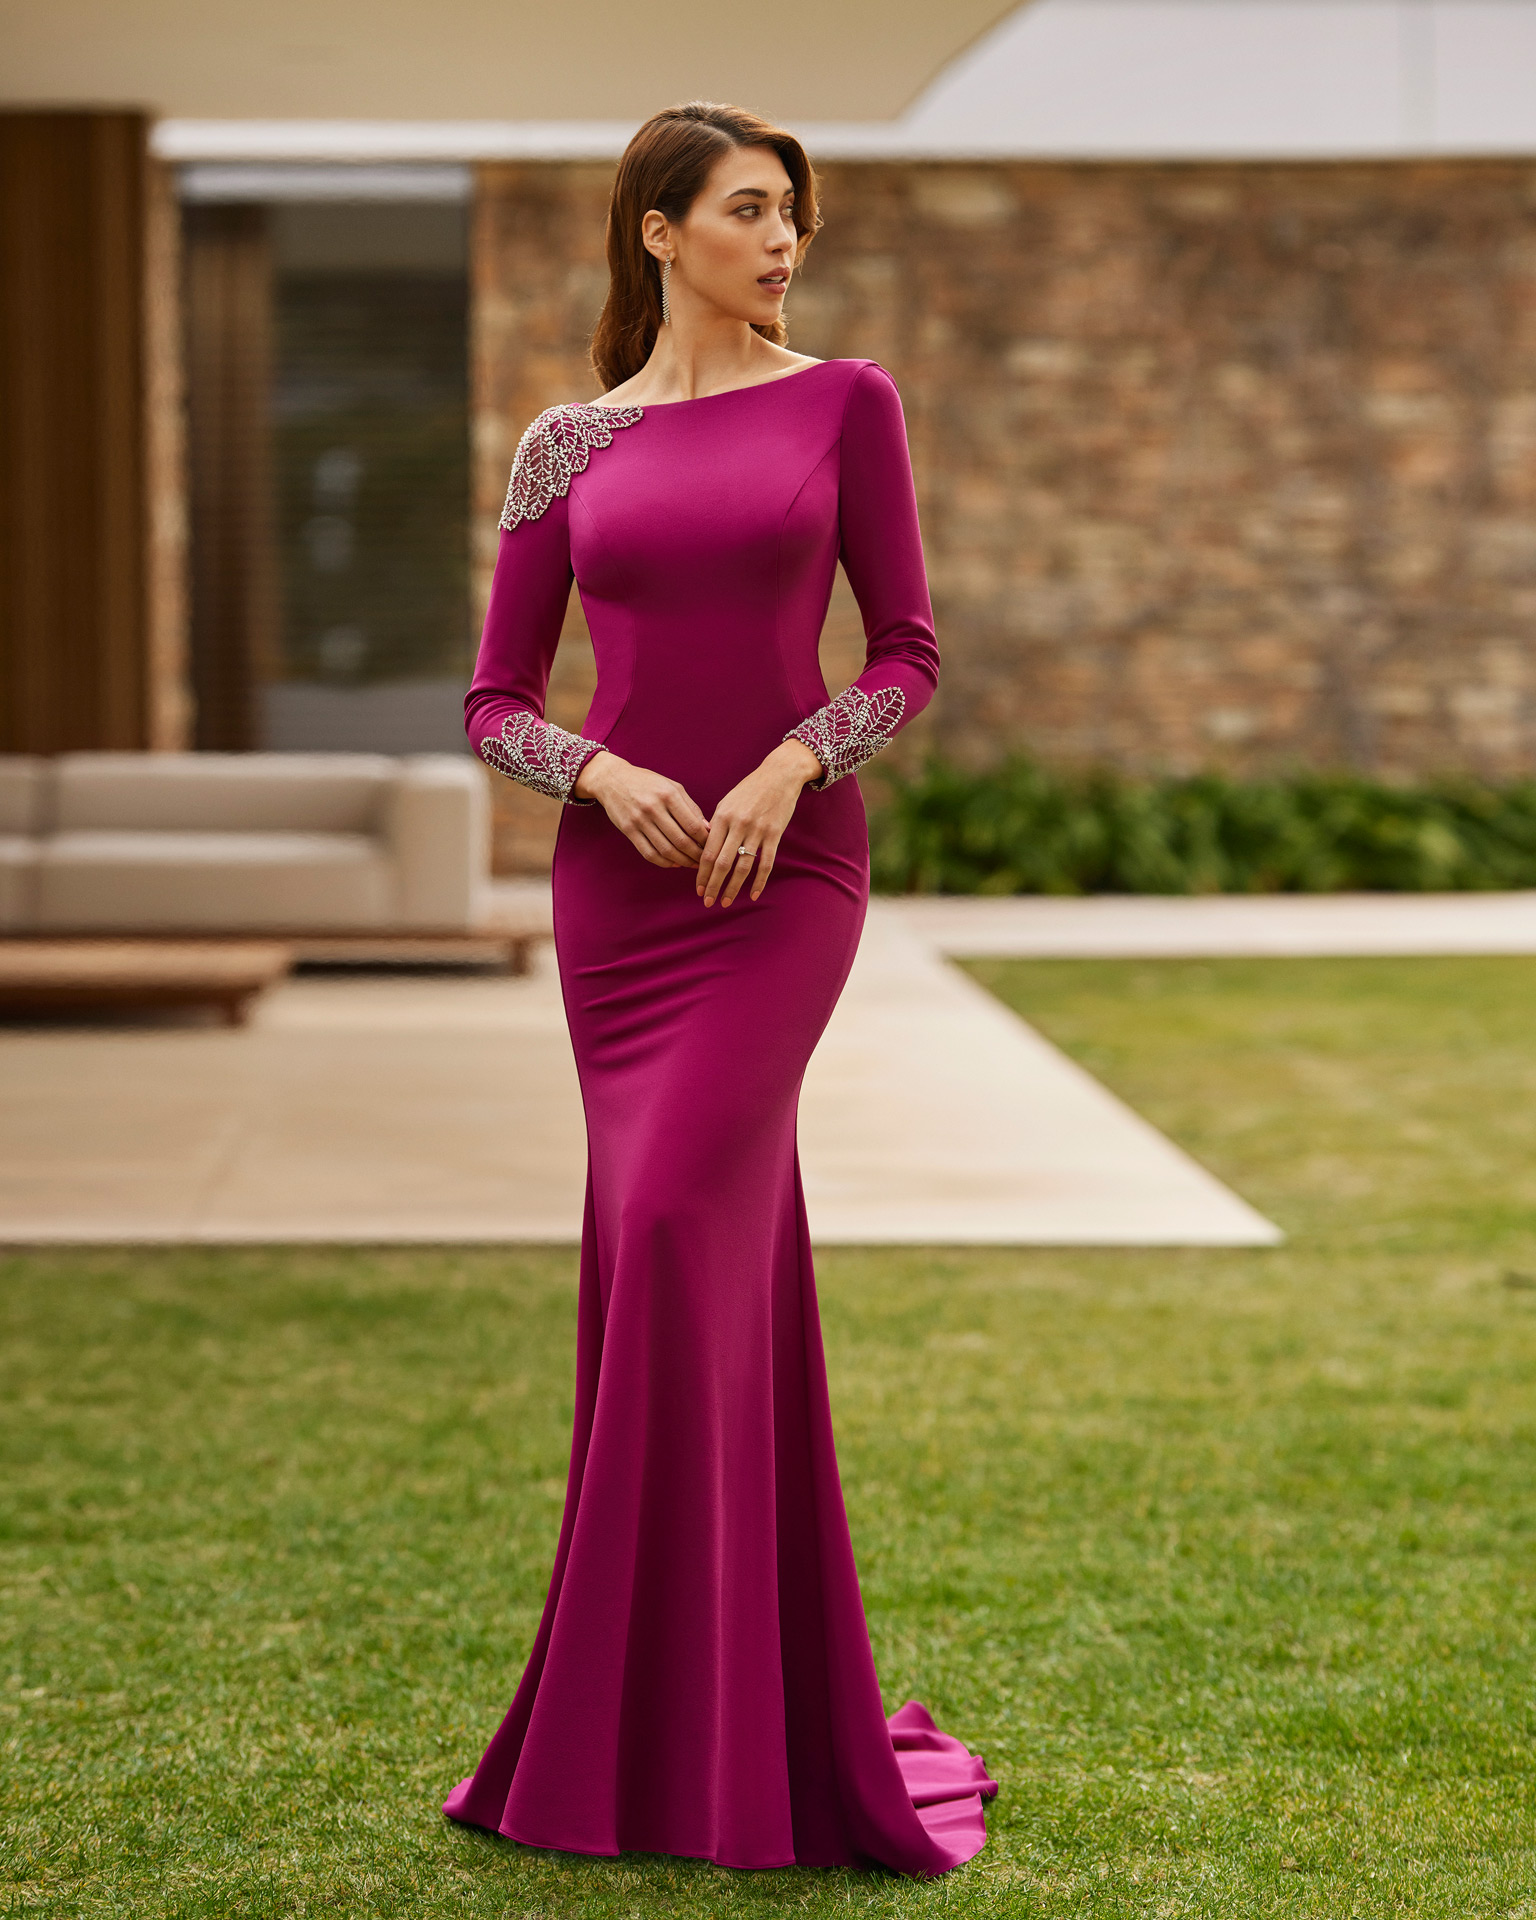 Elegant long evening dress. Made with crêpe embellished with beadwork. With round neckline and plunging back, and long sleeves with beadwork. Marfil Barcelona dreamy look. MARFIL_BARCELONA.